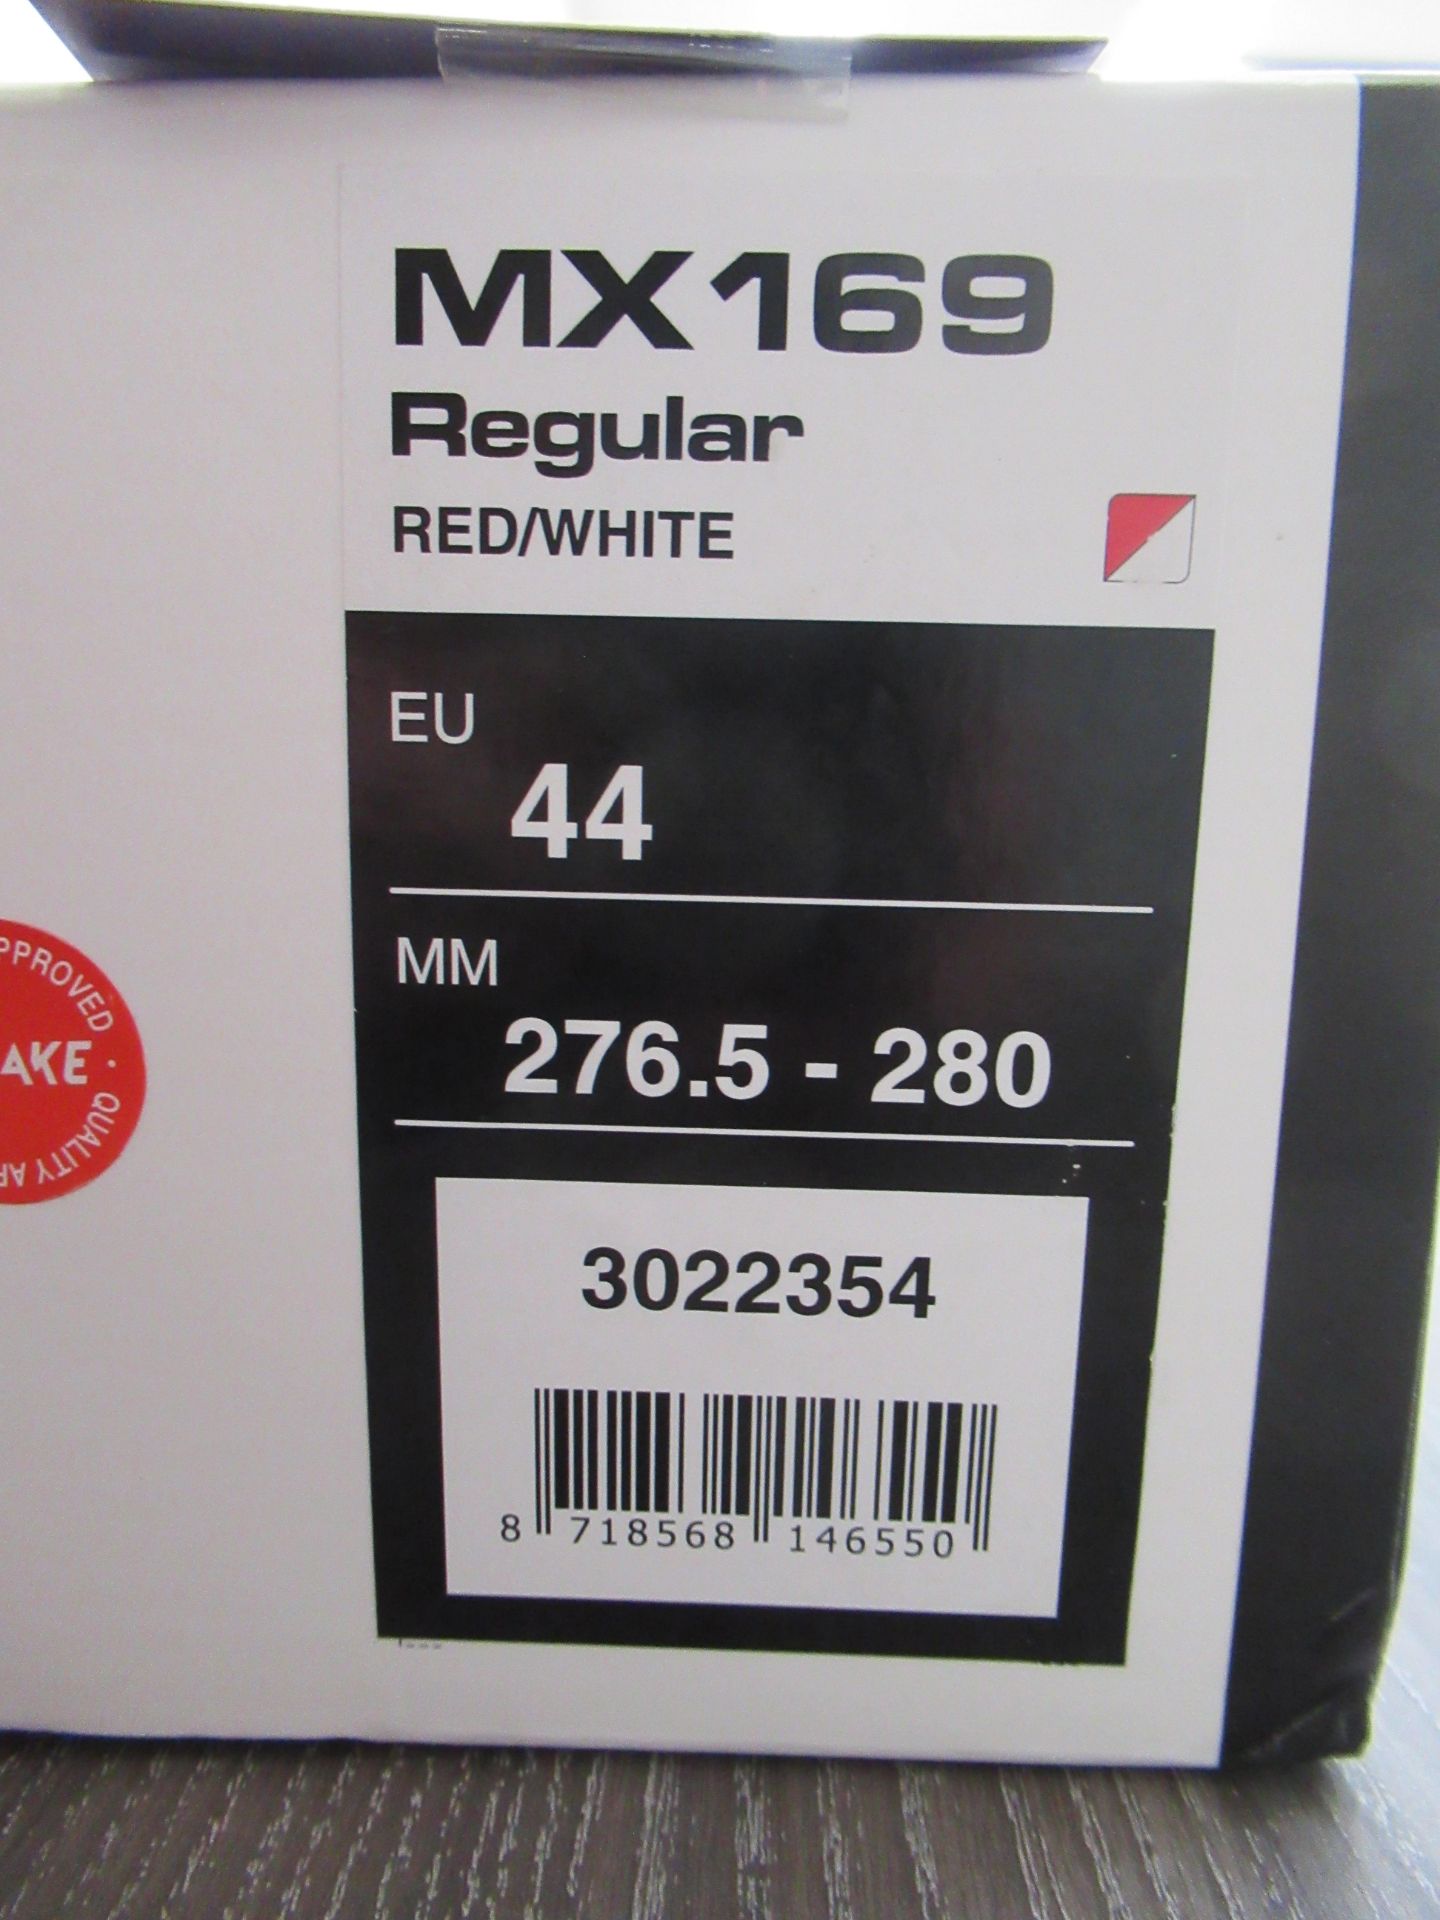 Pair of Lake MX169 cycling shoes (red/white) - boxed EU size 44 (RRP£142) - Image 3 of 4